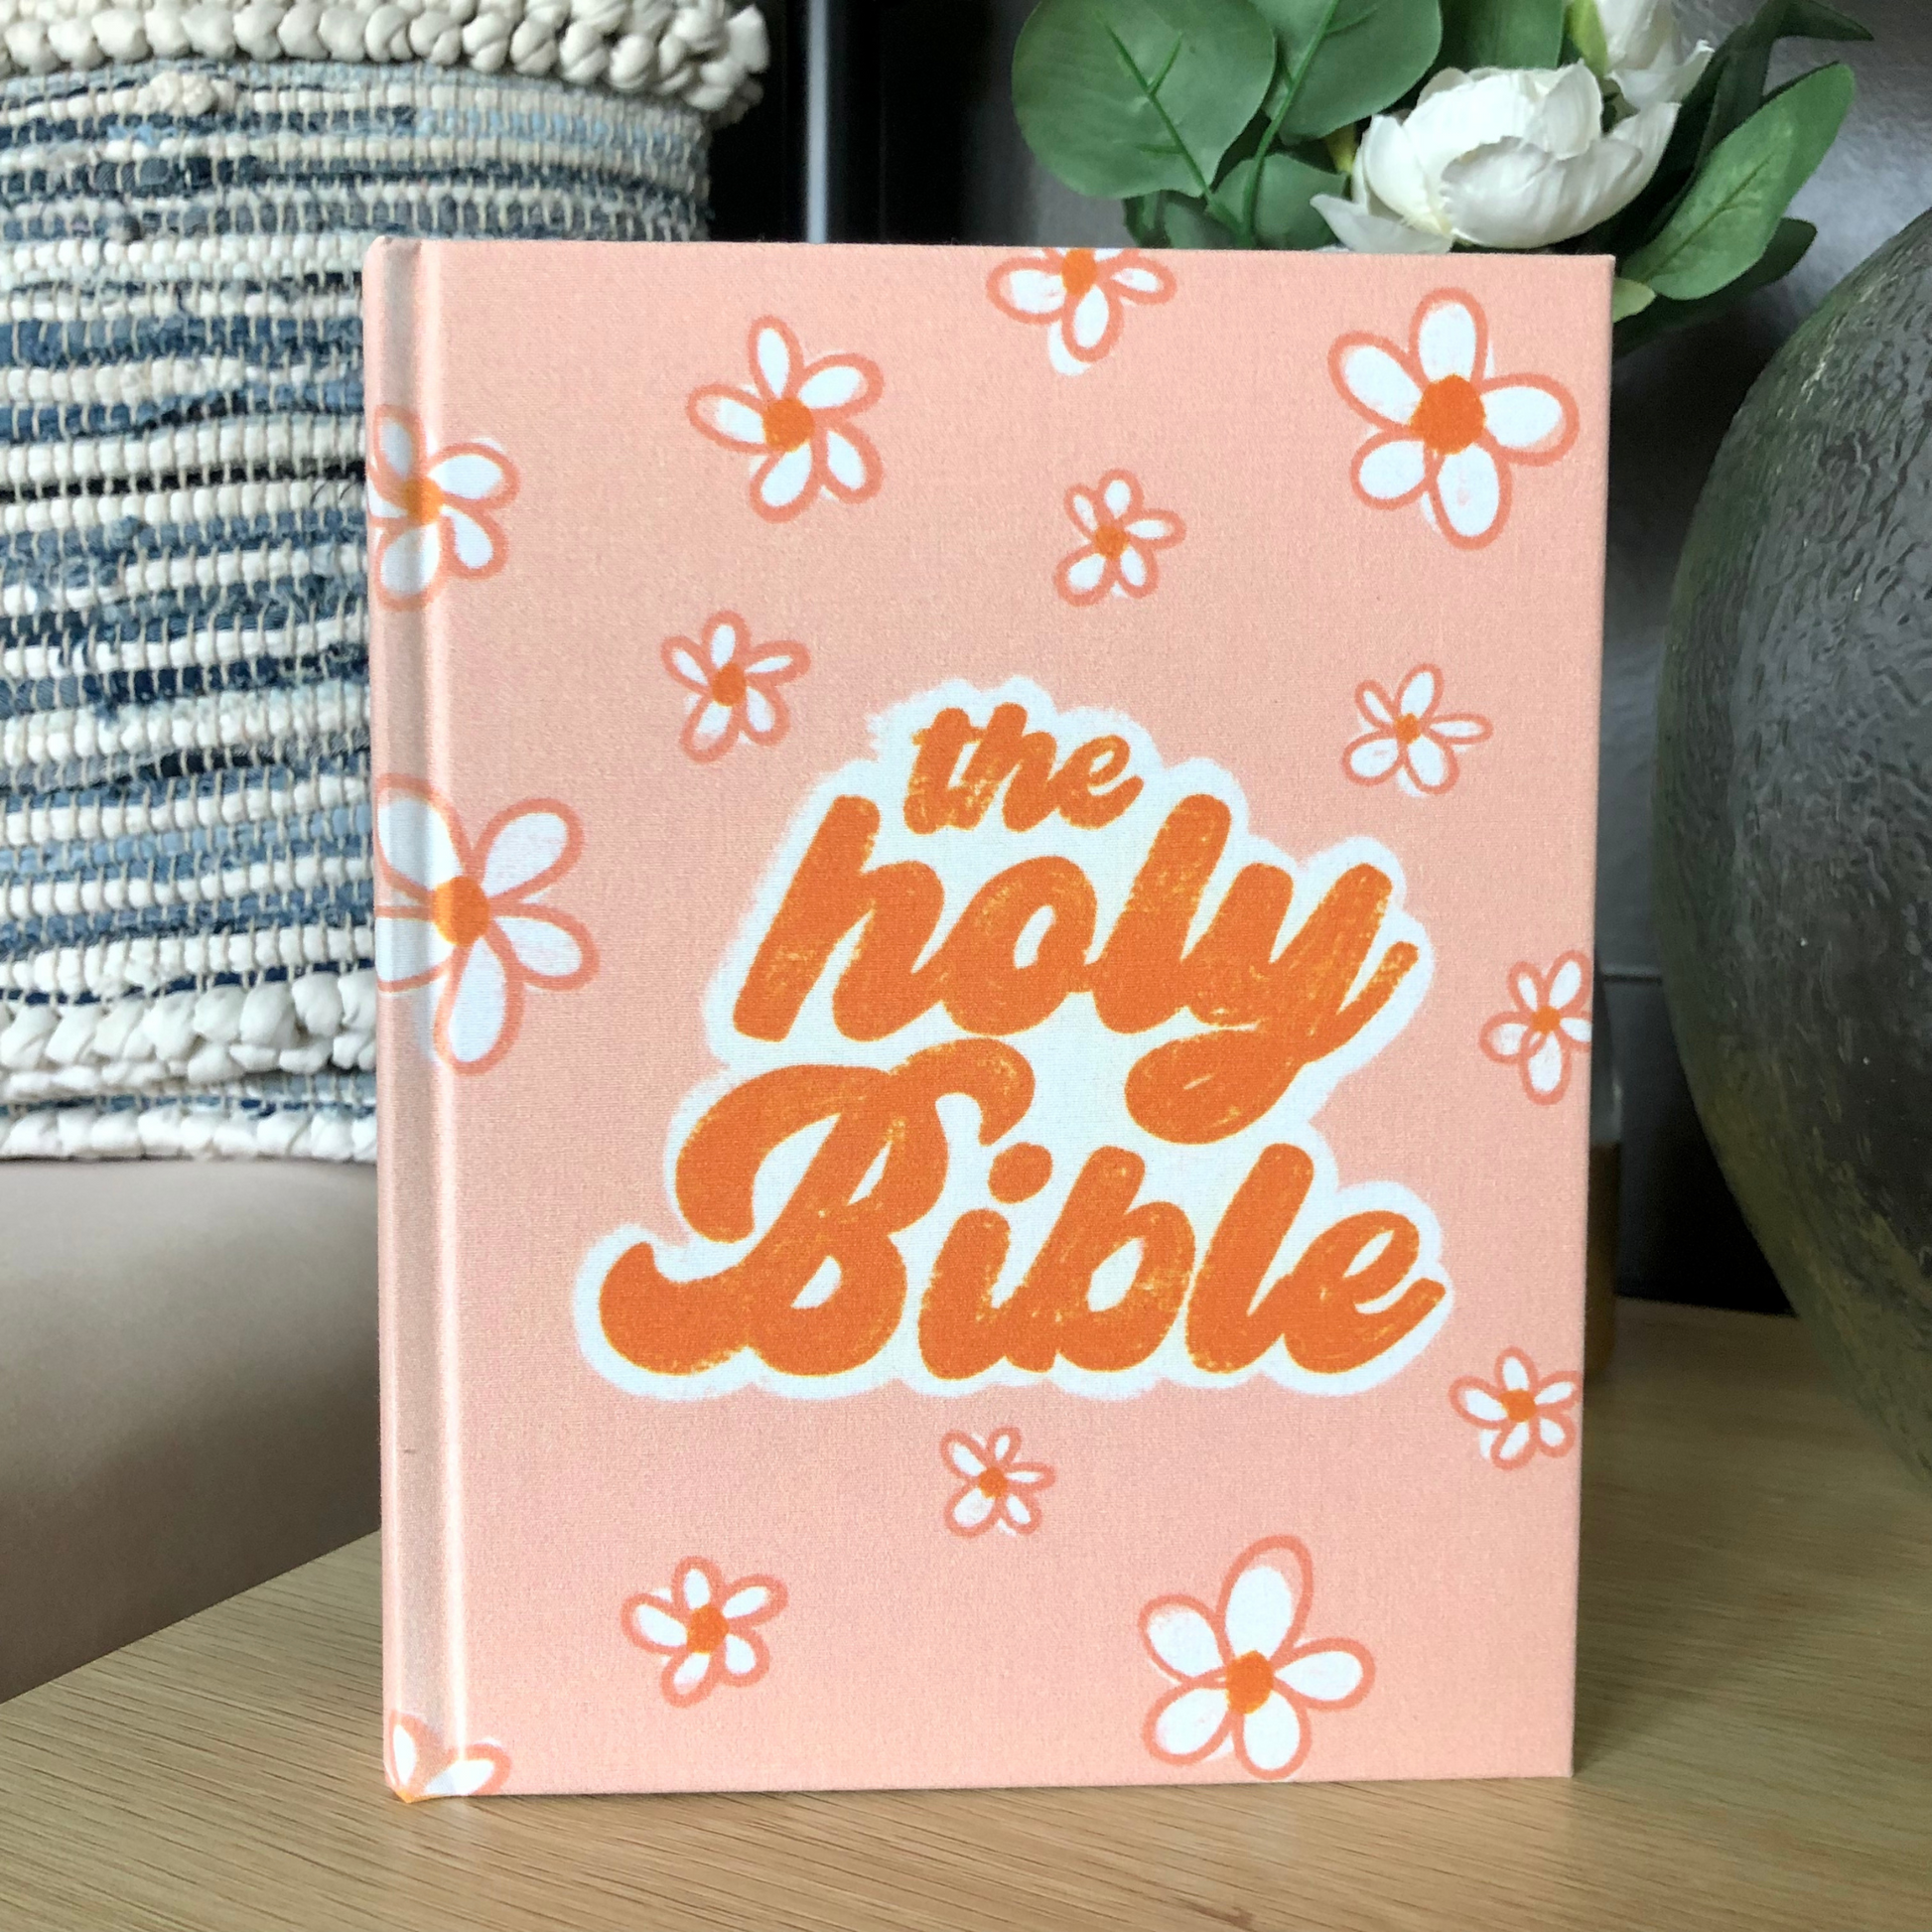 Beautiful Daisy Artwork Adorns the Cover of this ESV Journaling Bible